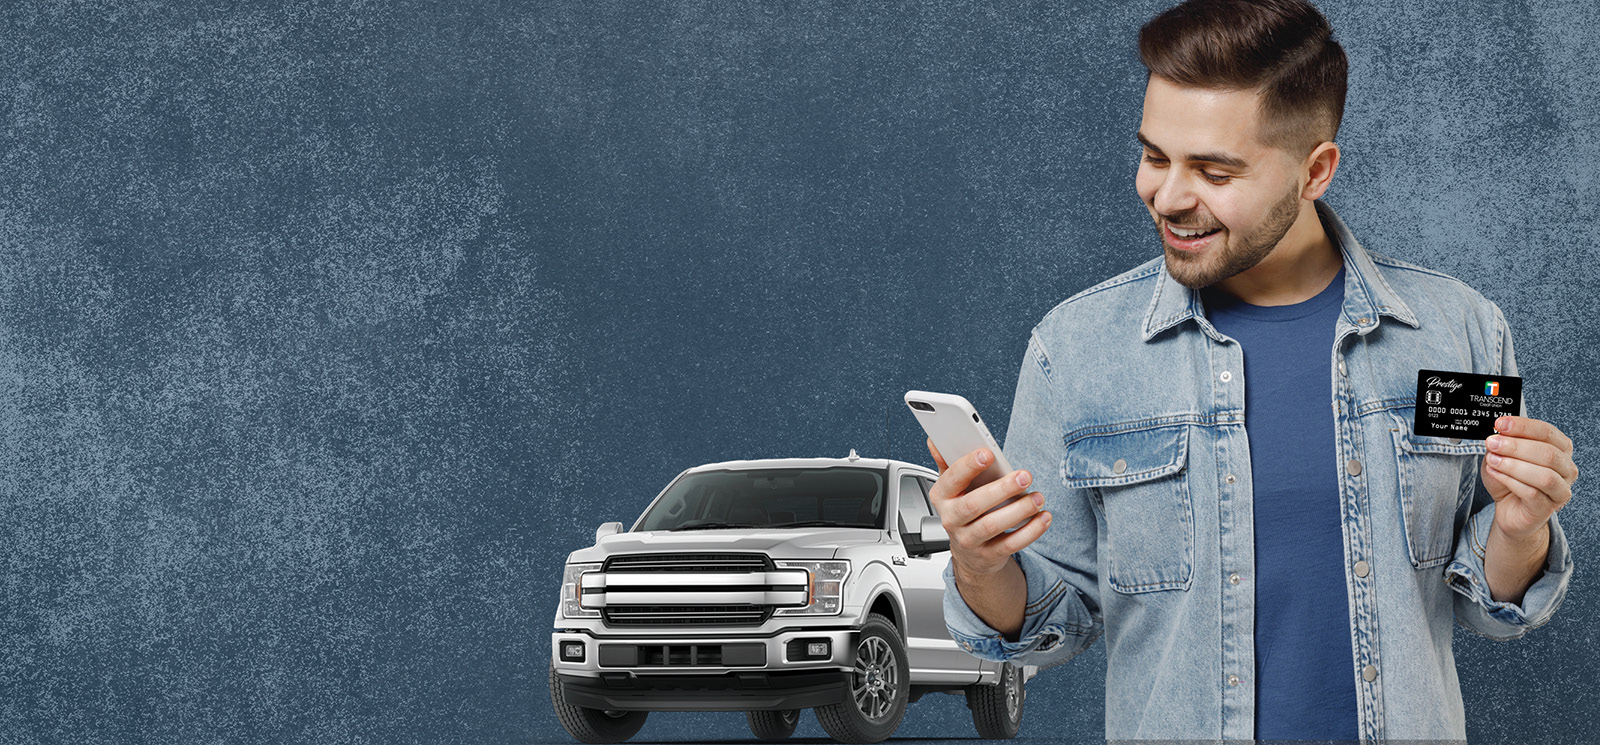 young man with credit card and truck looking at his phone